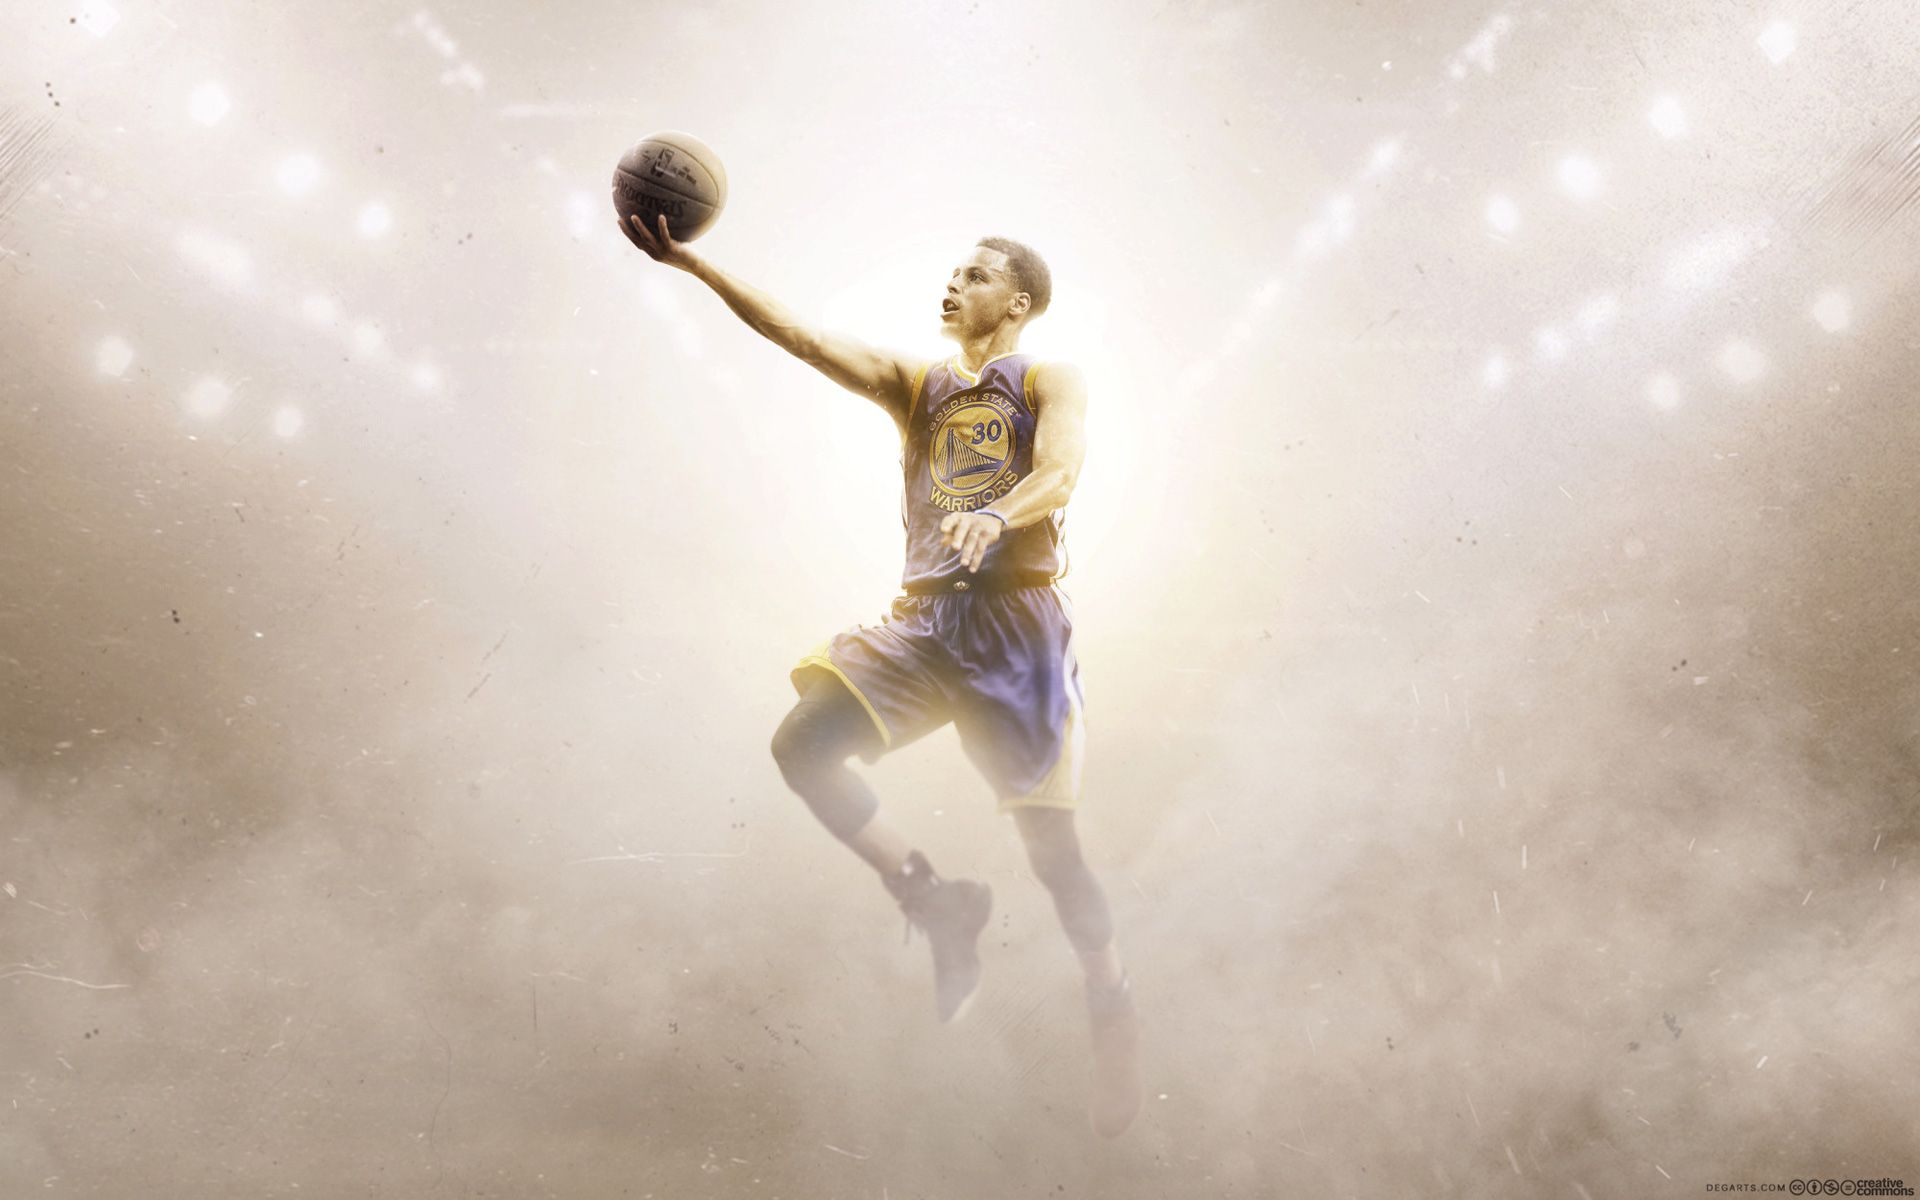 Stephen Curry desktop background Wallpapers, Backgrounds, Images